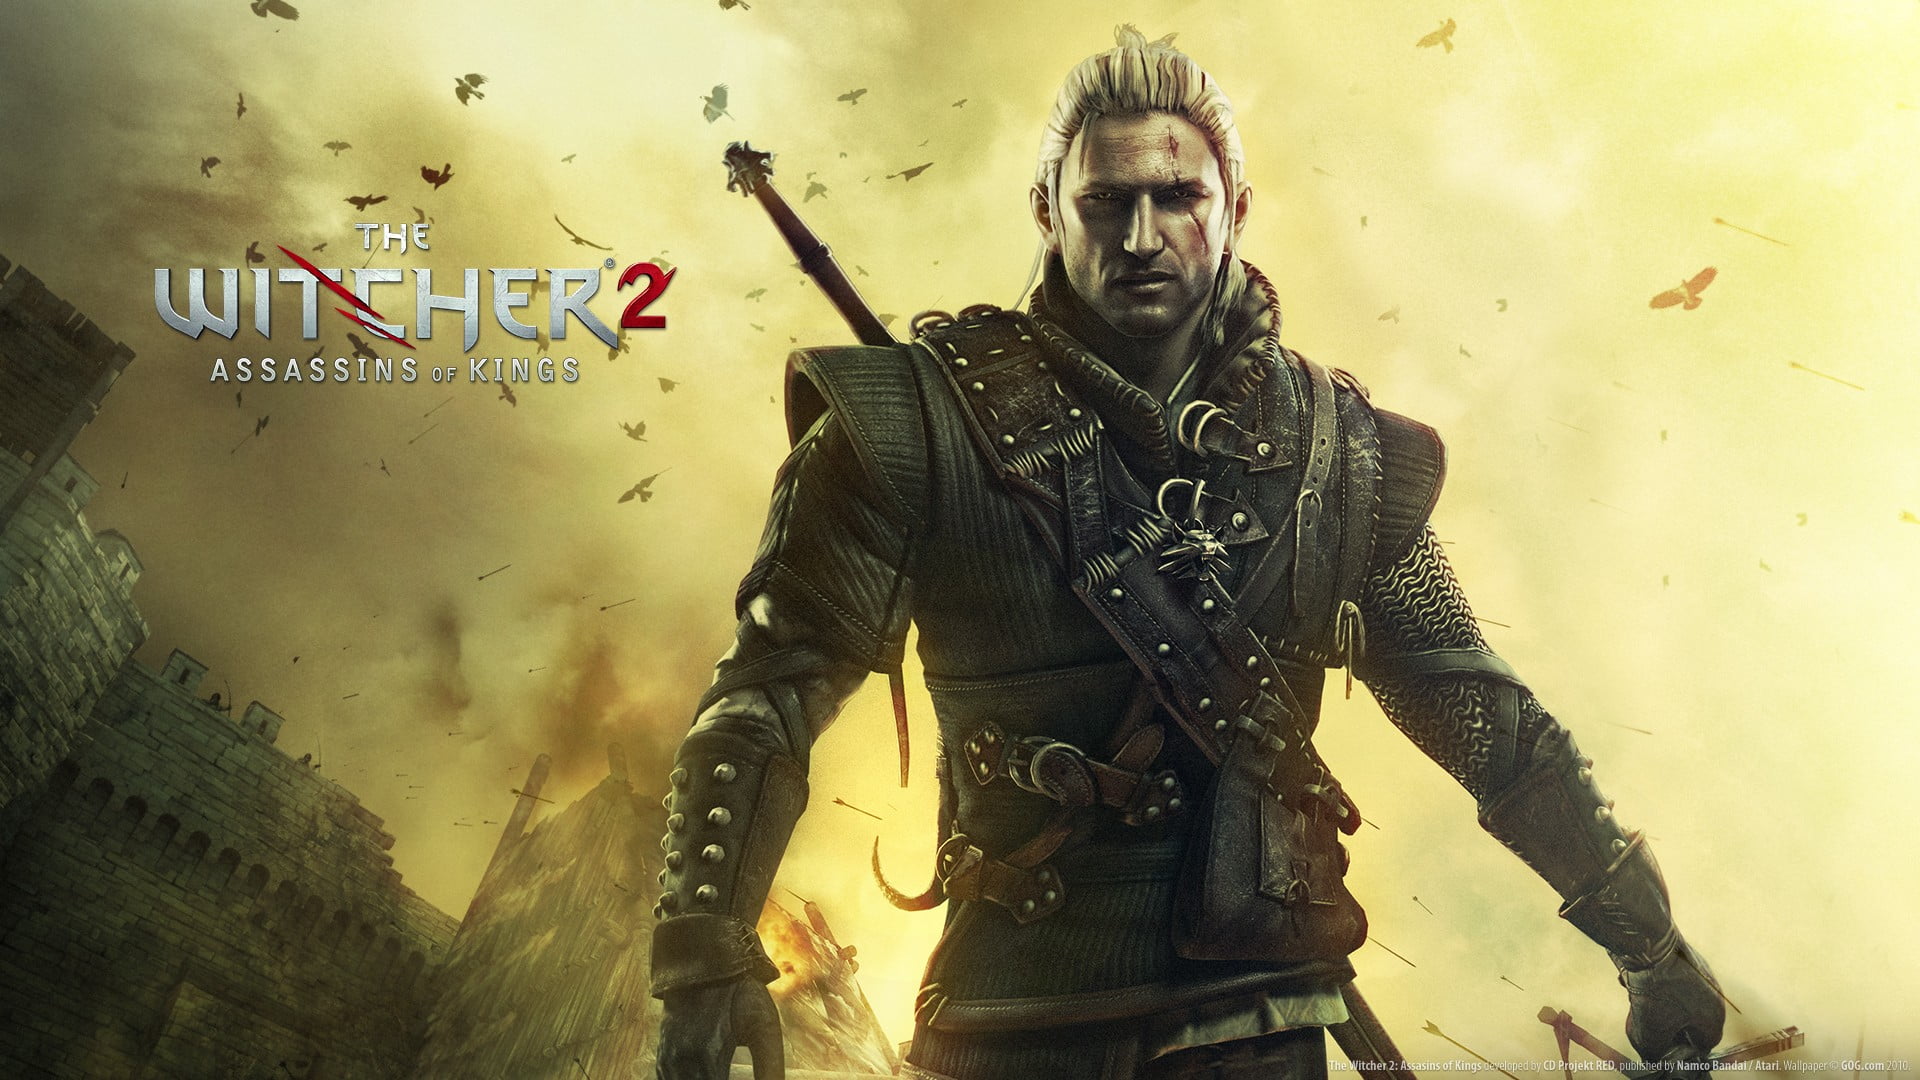 Witchers 2 Game Wallpaper, The Witcher 2 Assassins Of Kings, The Witcher,  Geralt Of Rivia Hd Wallpaper | Wallpaper Flare